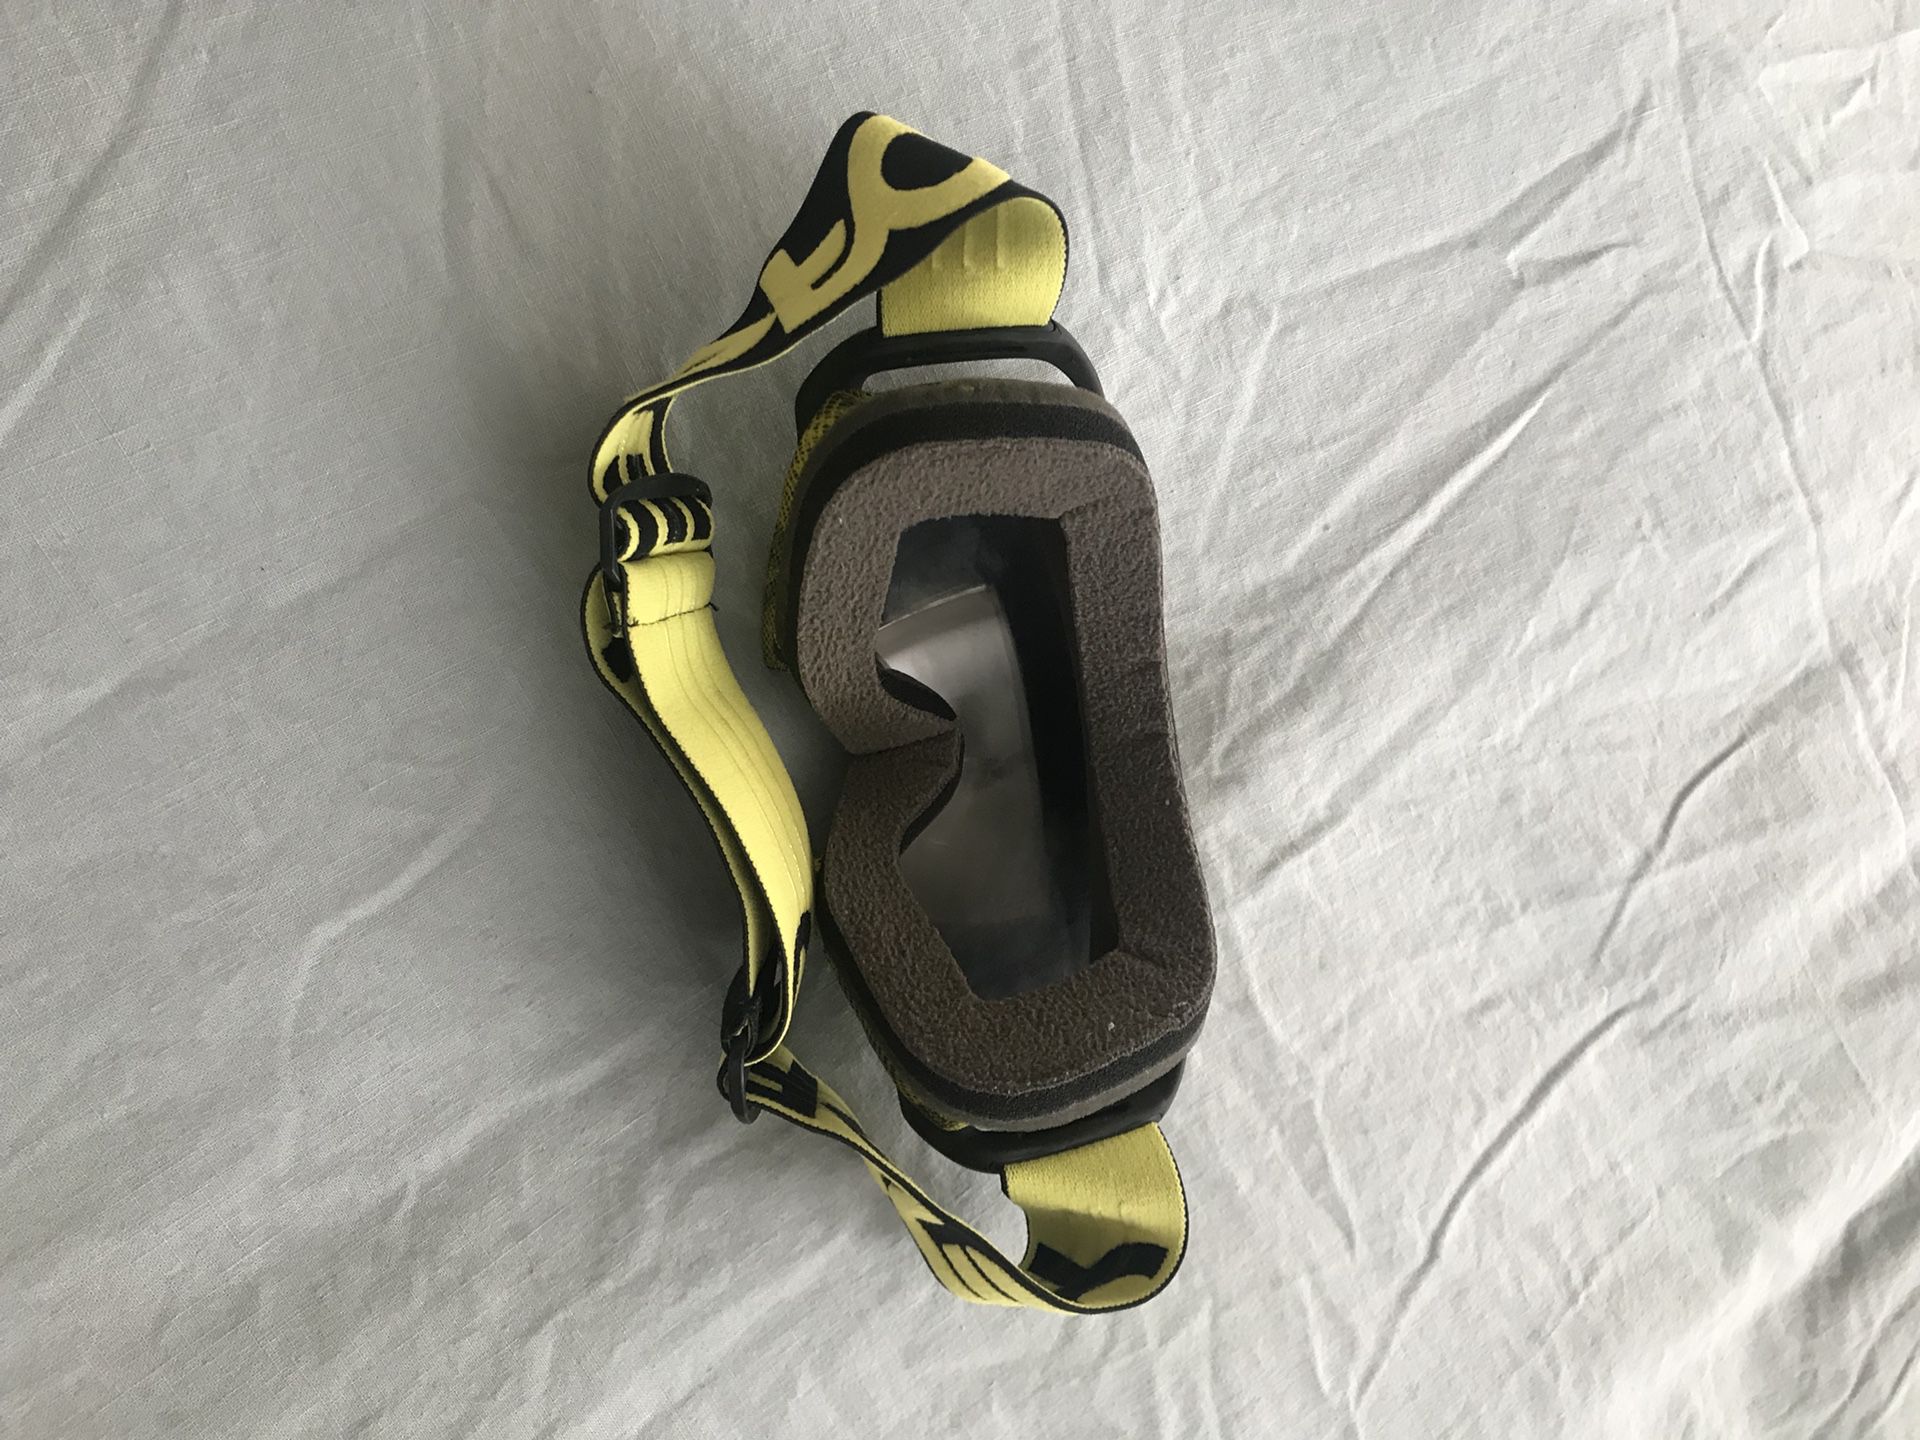 Yellow and black Oakley snowboarding goggles